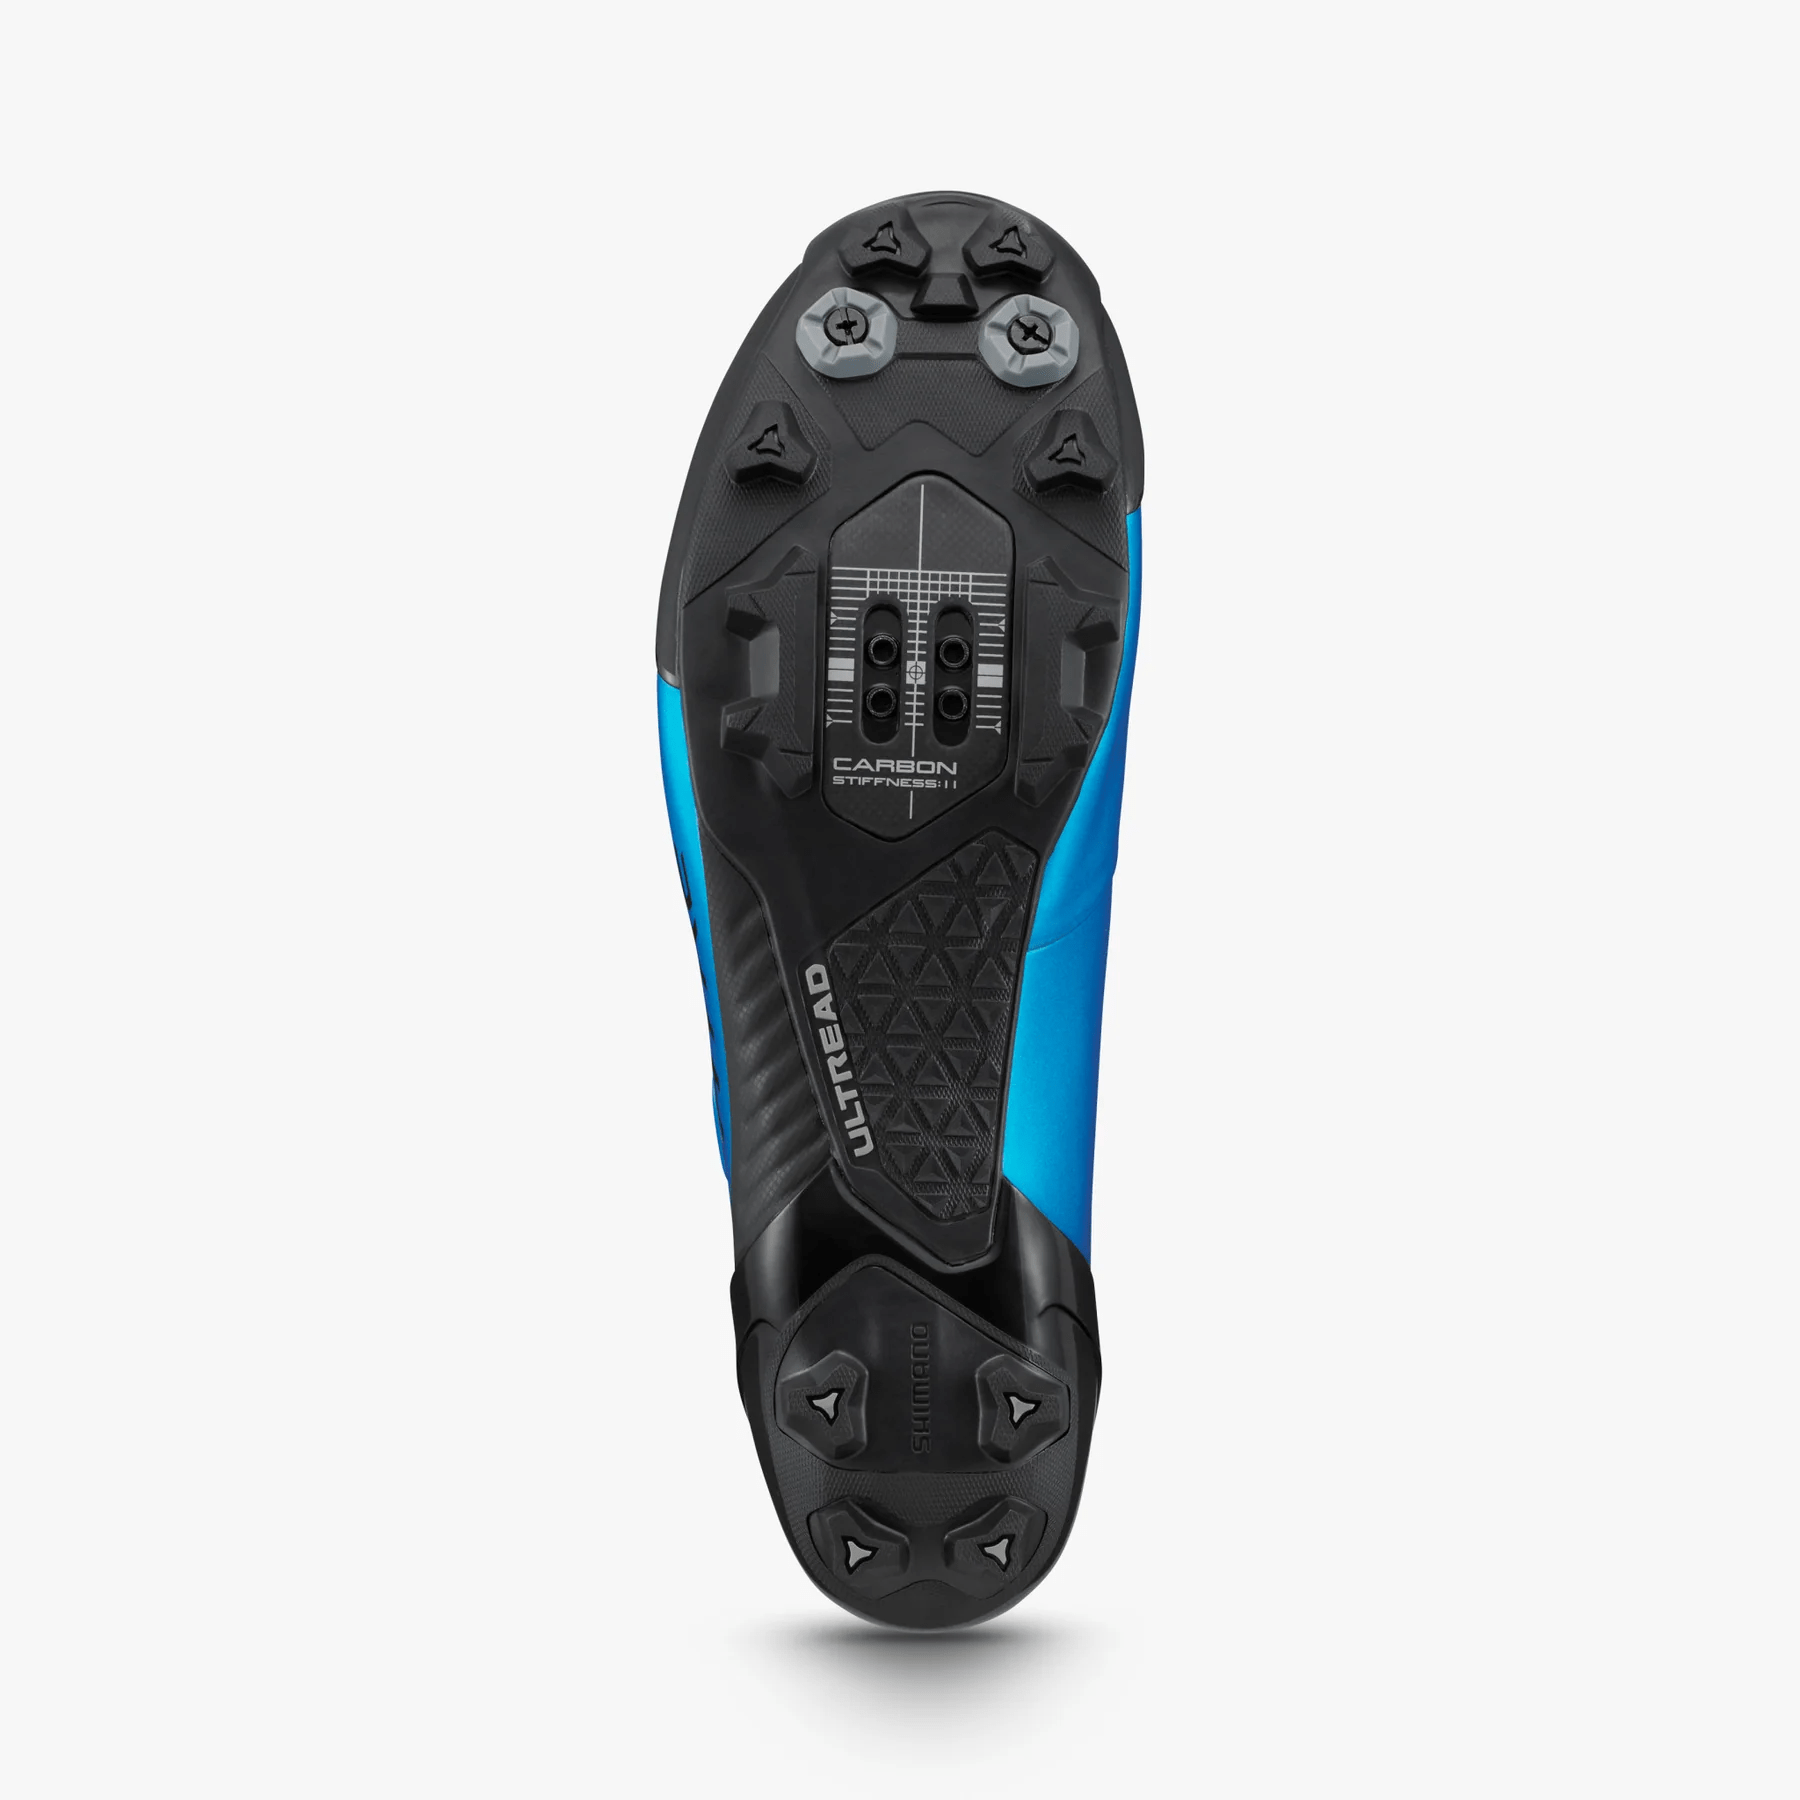 Shimano S-PHYRE SH-XC903 Shoe Apparel - Apparel Accessories - Shoes - Mountain - Clip-in